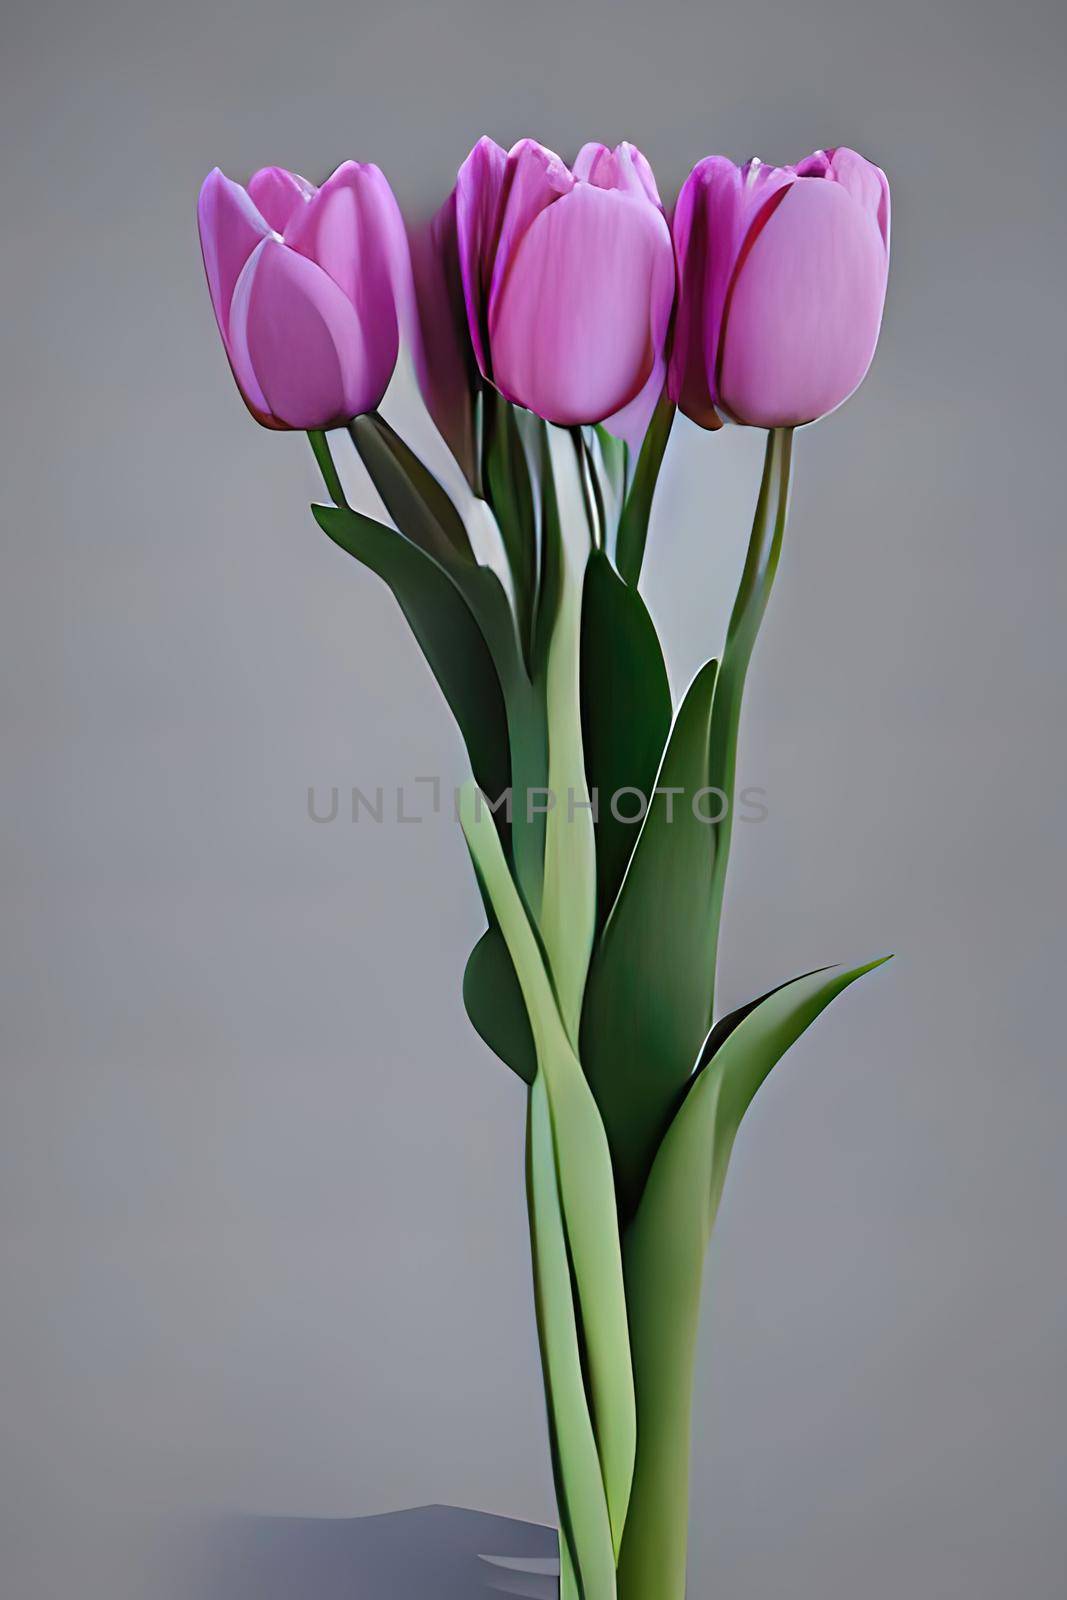 bouquet of tulips on grey gradient background